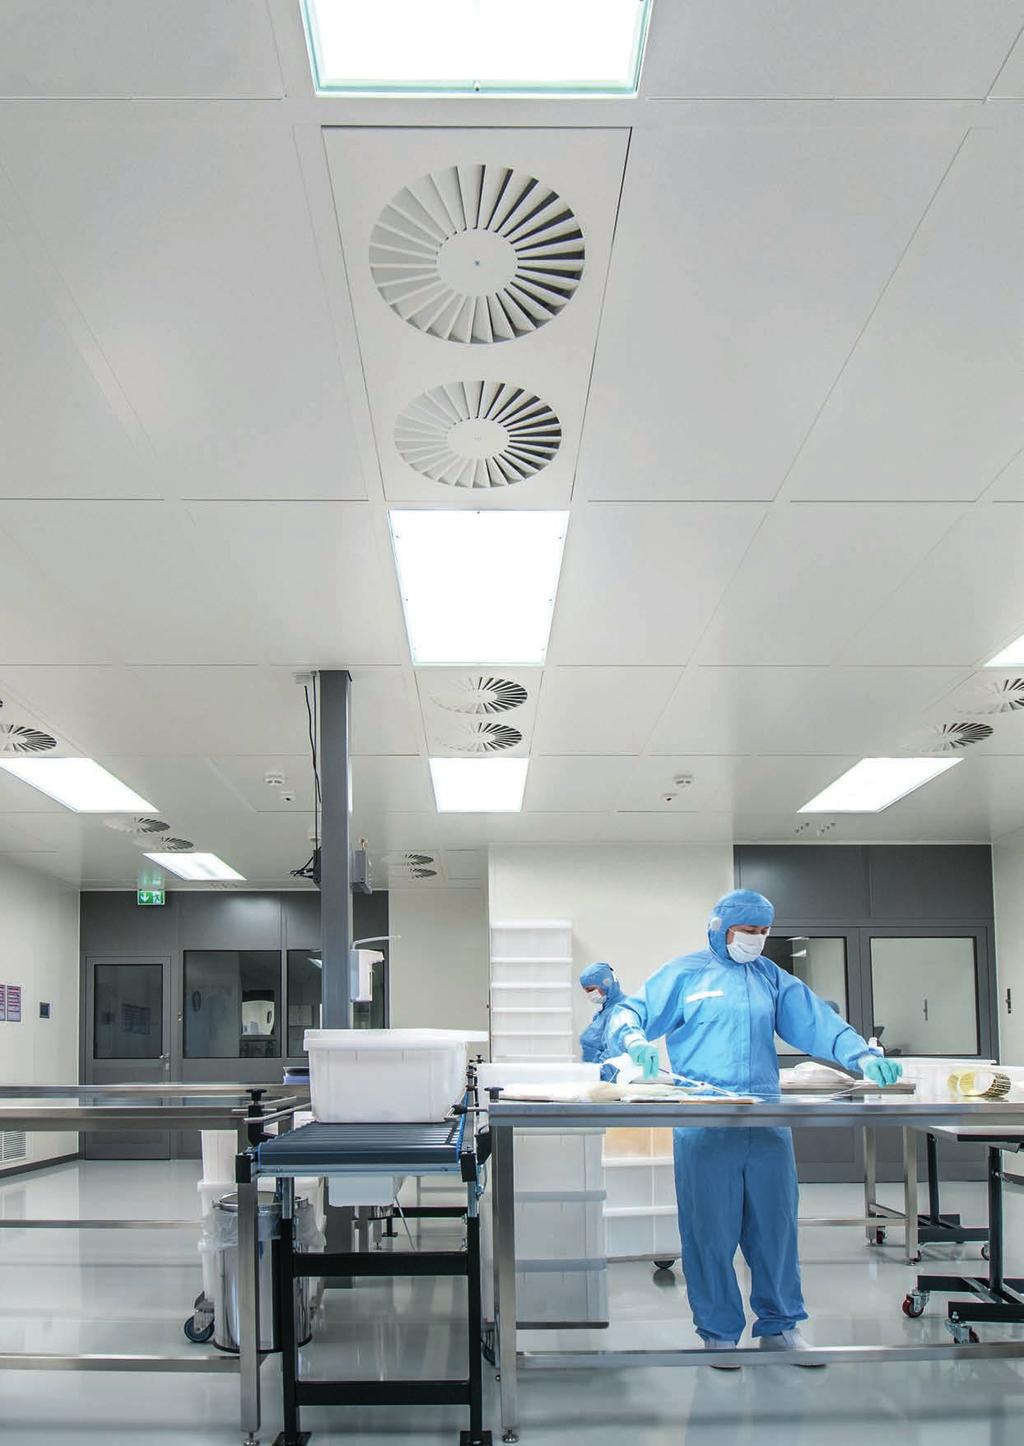 Clean room or controlled zone? Particle size is the deciding factor Content Clean room or controlled zone?